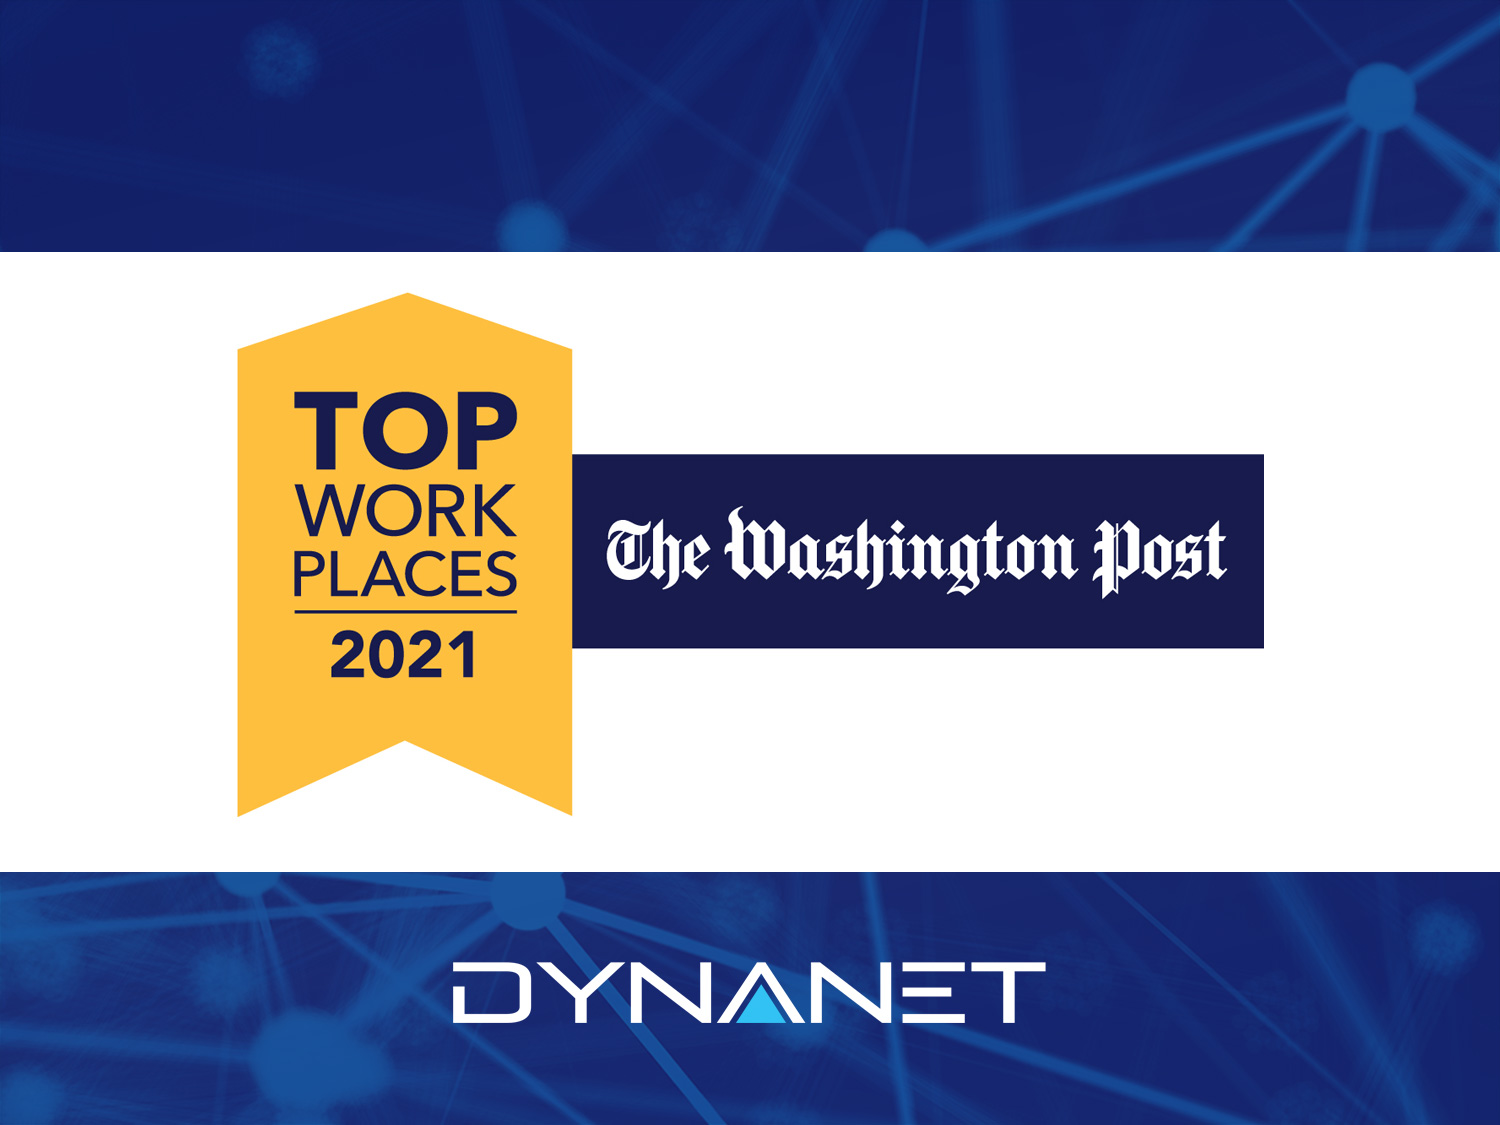 Top Work Places - The Washington Post